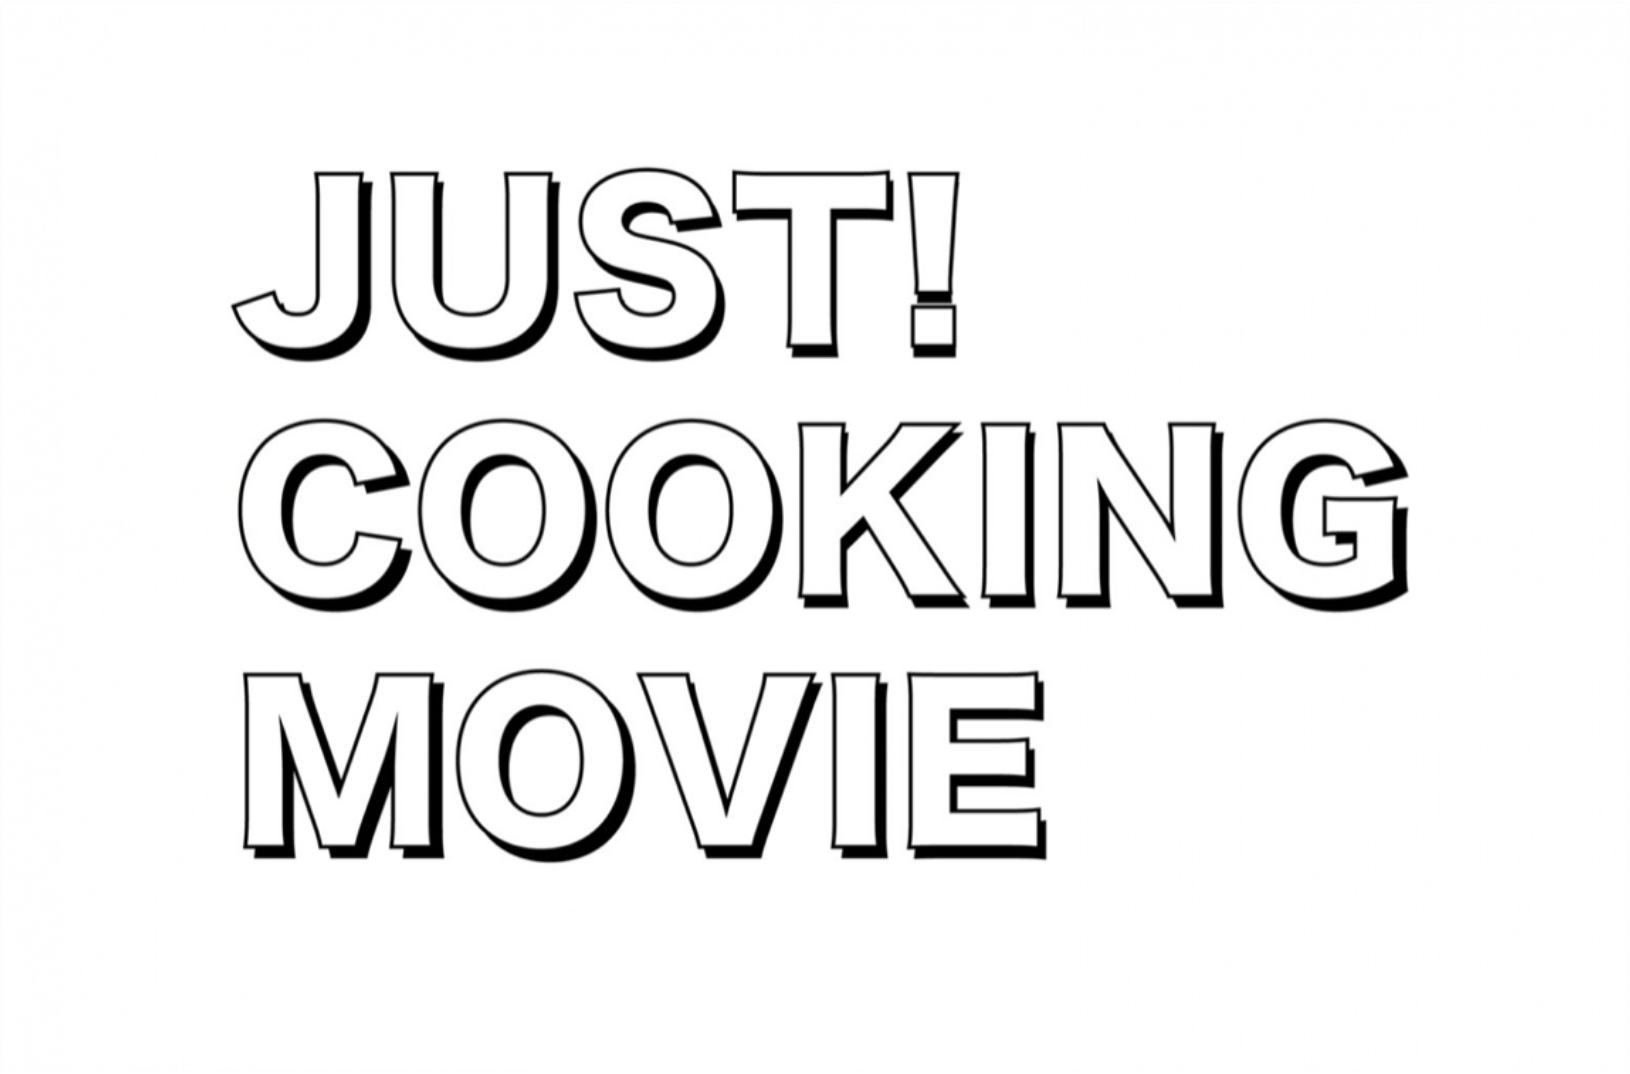 JUST! COOKING MOVIE #1